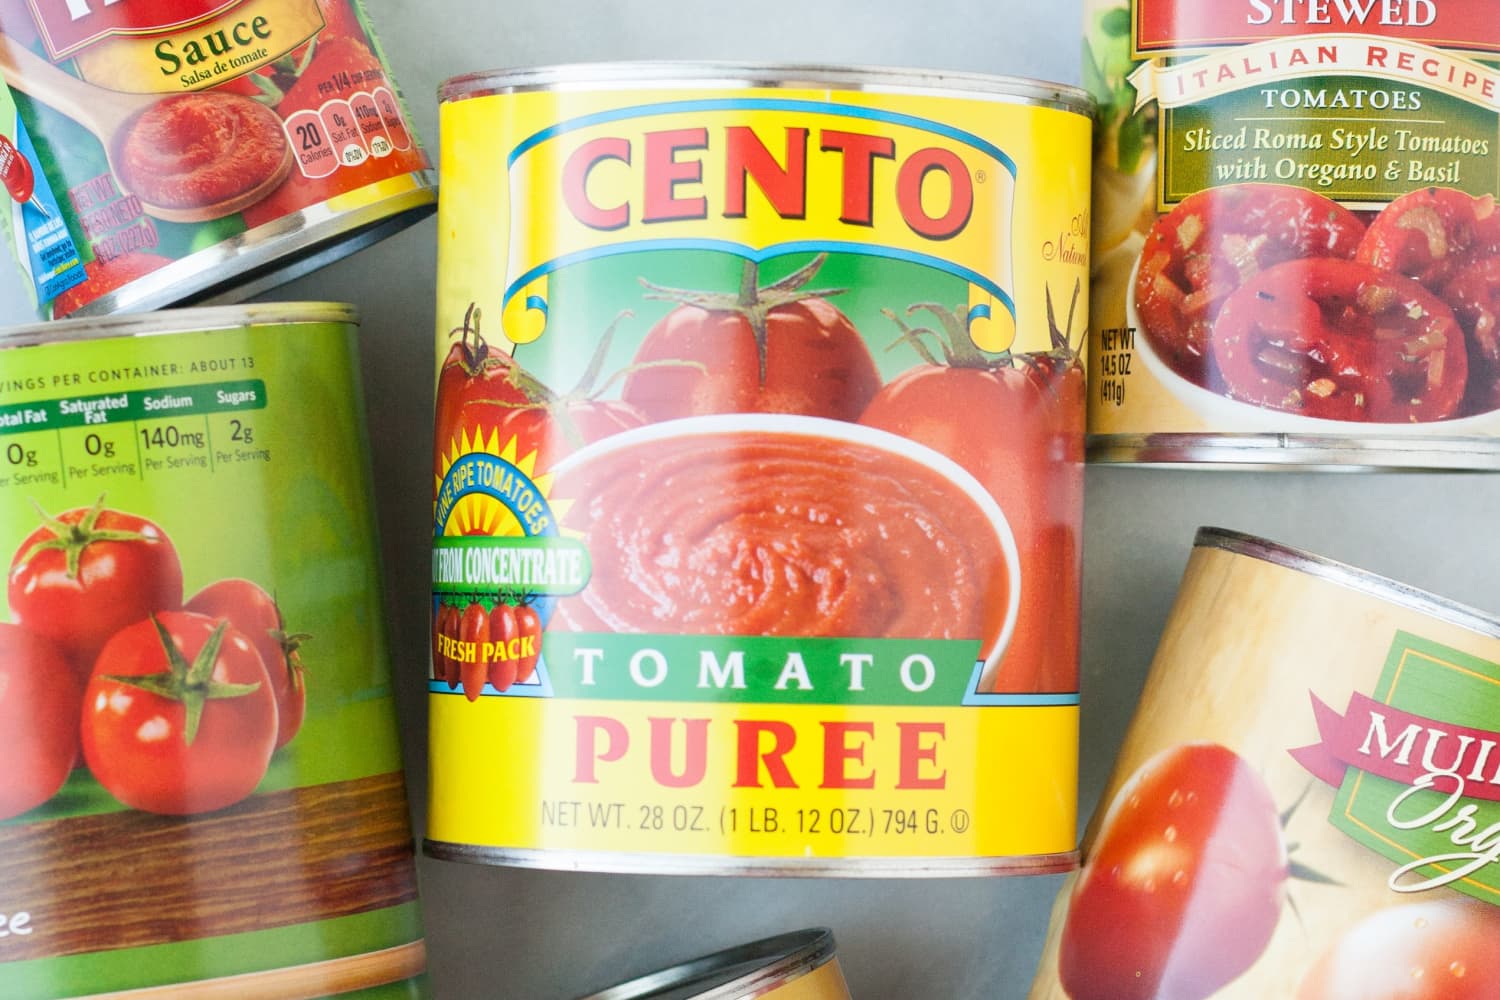 A Visual Guide to the 7 Major Types of Canned Tomatoes